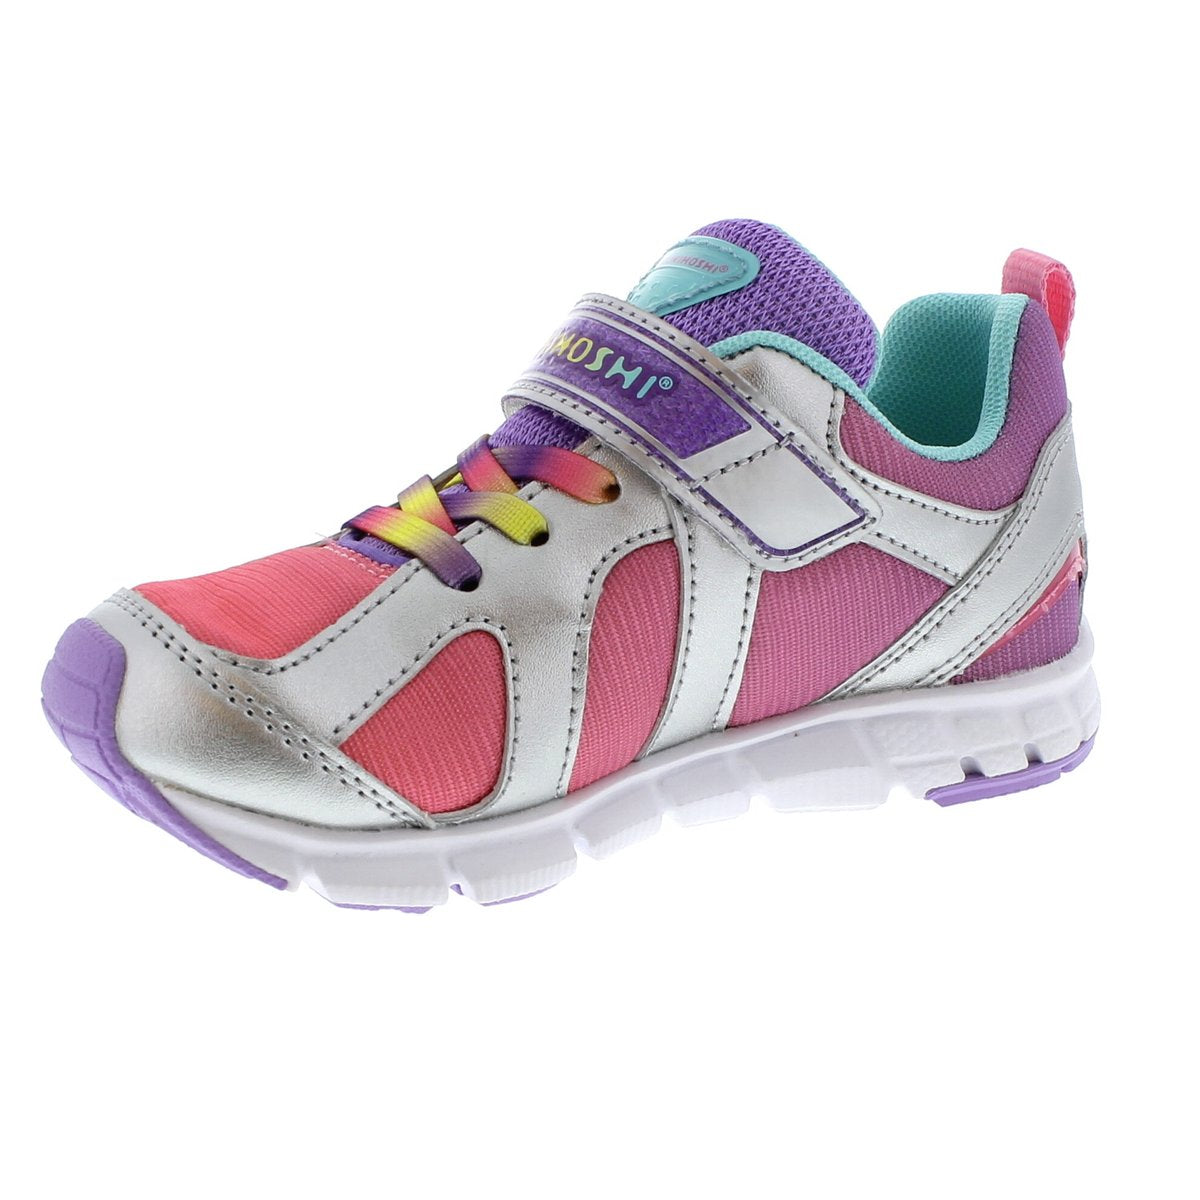 Child Tsukihoshi Rainbow Sneaker in Silver/Lavender from the front view